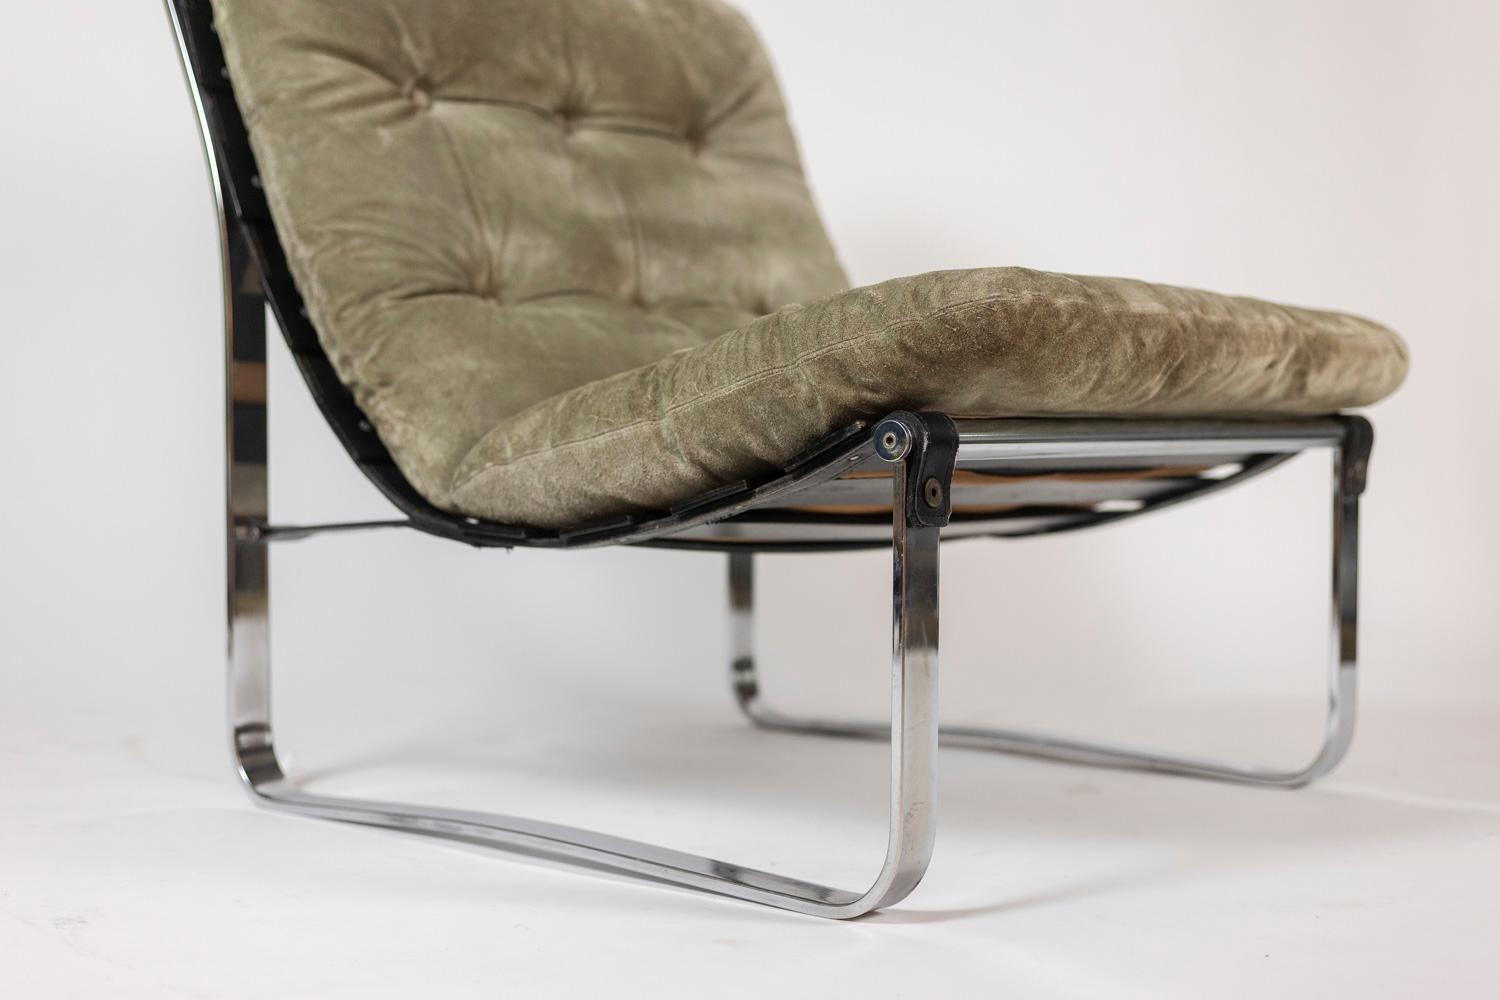 Ico Parisi, by.

Pair of armchairs. Chromed metal base. Light green suede cushion, padded. Black leather straps.

Italian work realized in the 1970s.

Reference: LS57121089D